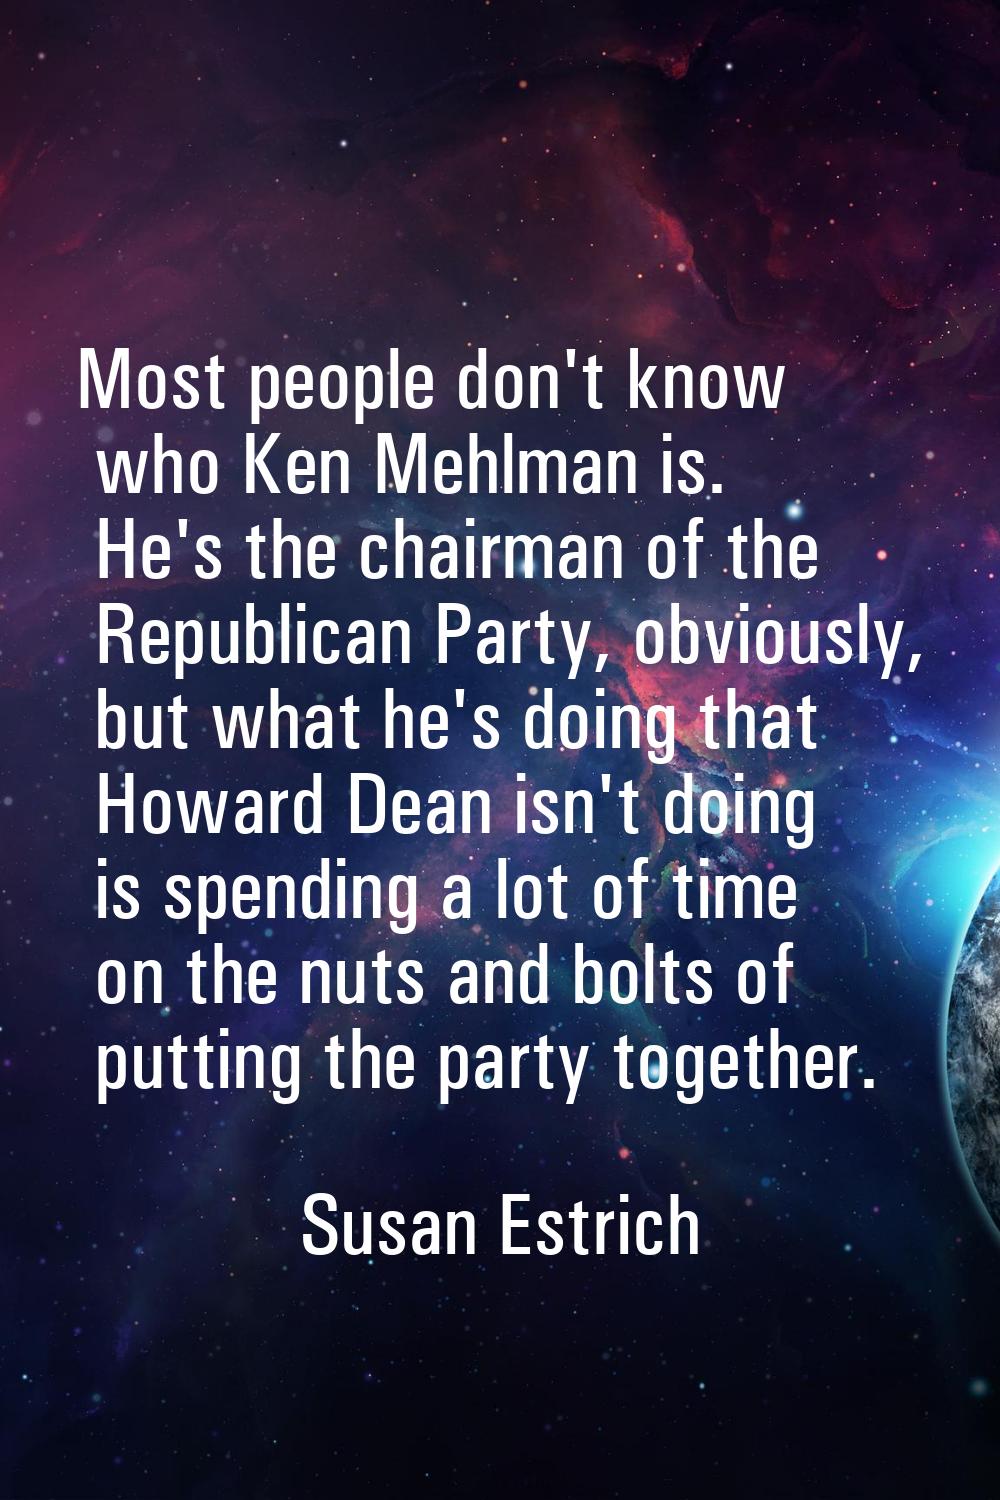 Most people don't know who Ken Mehlman is. He's the chairman of the Republican Party, obviously, bu